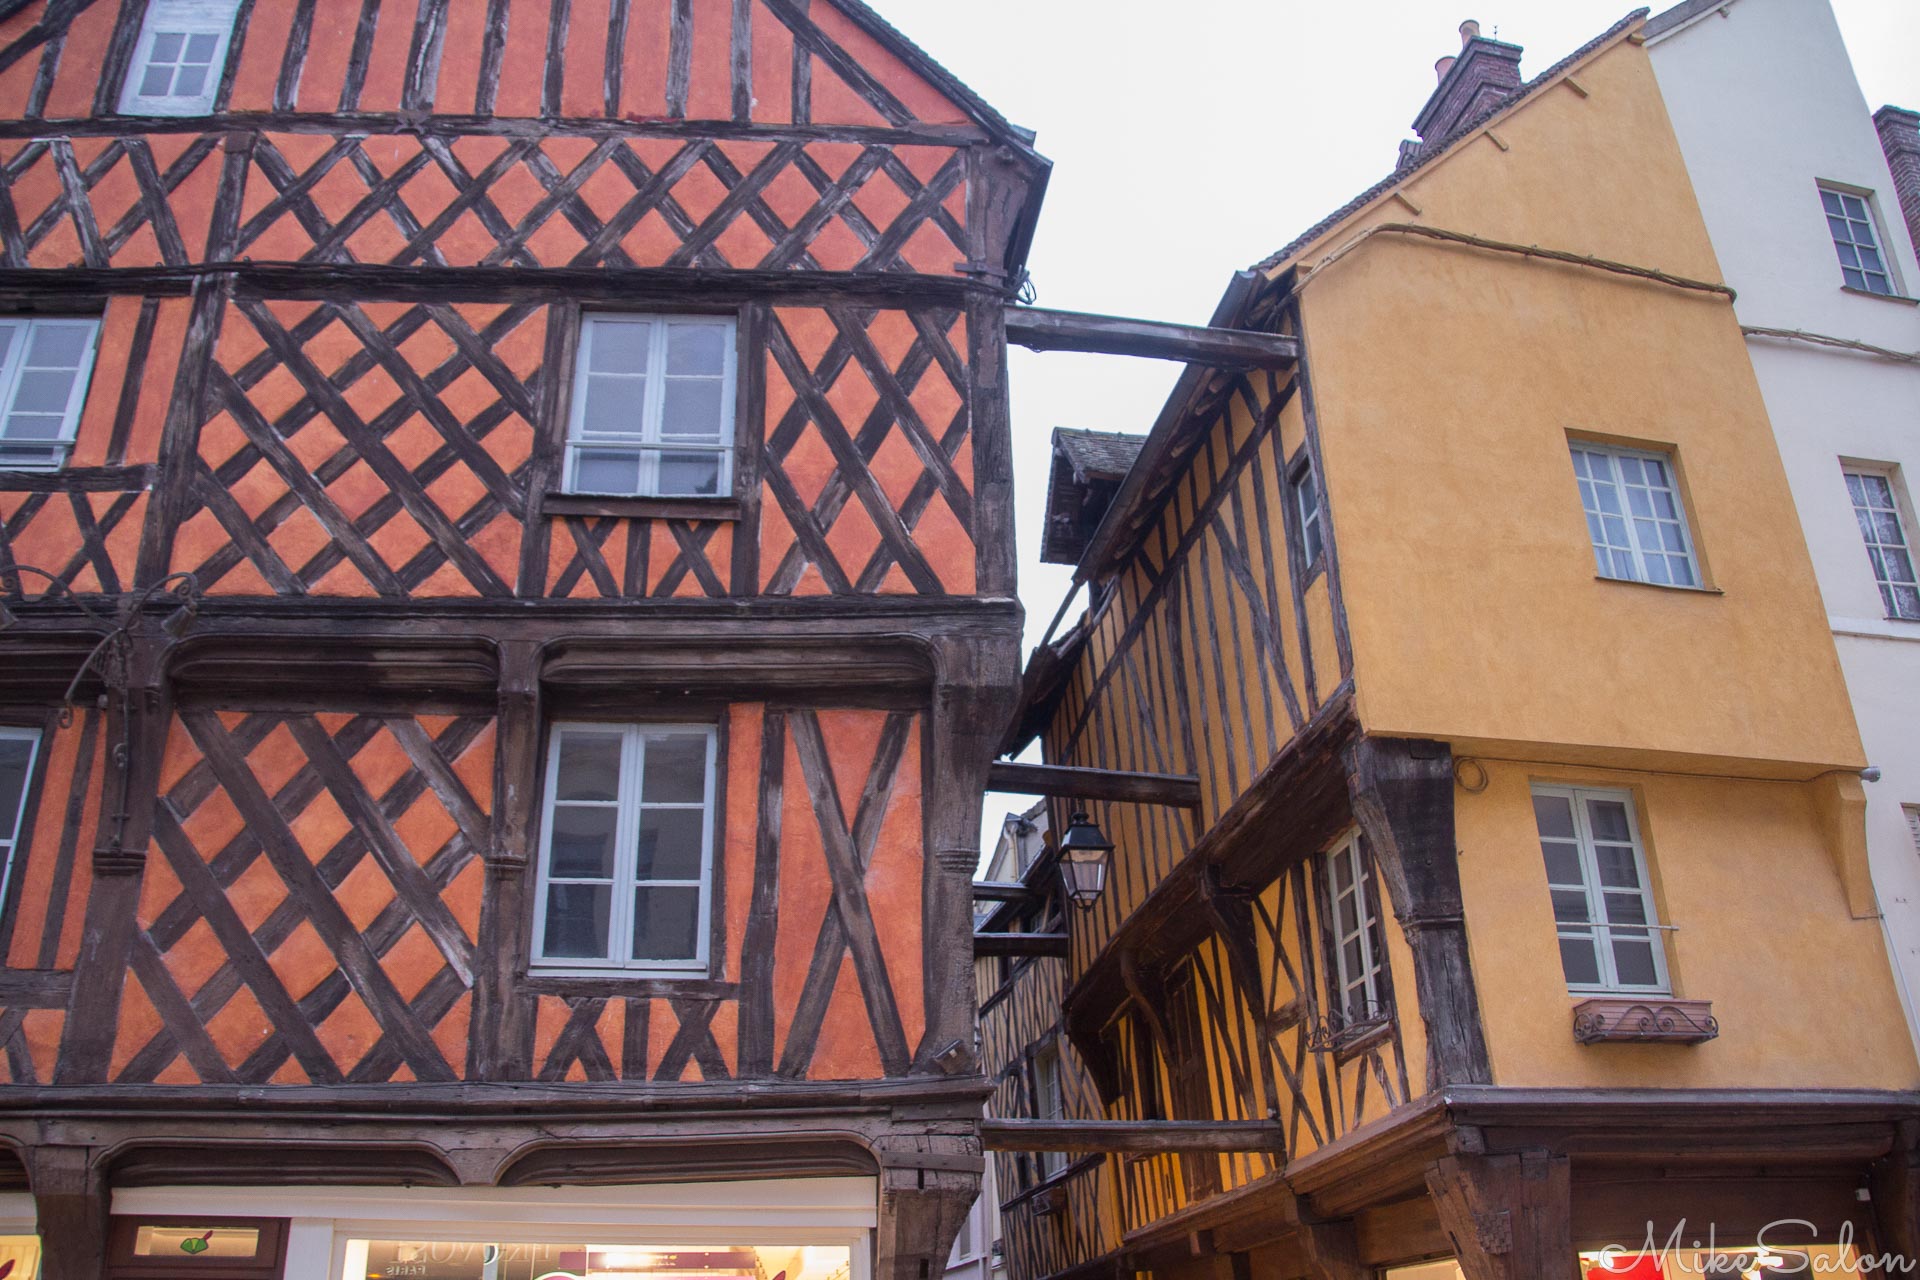 Shambles of Dreux : Wooden houses in Dreux dating back to the 15th Century lean precariously towards each other across a narrow lane. (IMG_2549.jpg)<br>Camera: Canon EOS 60D